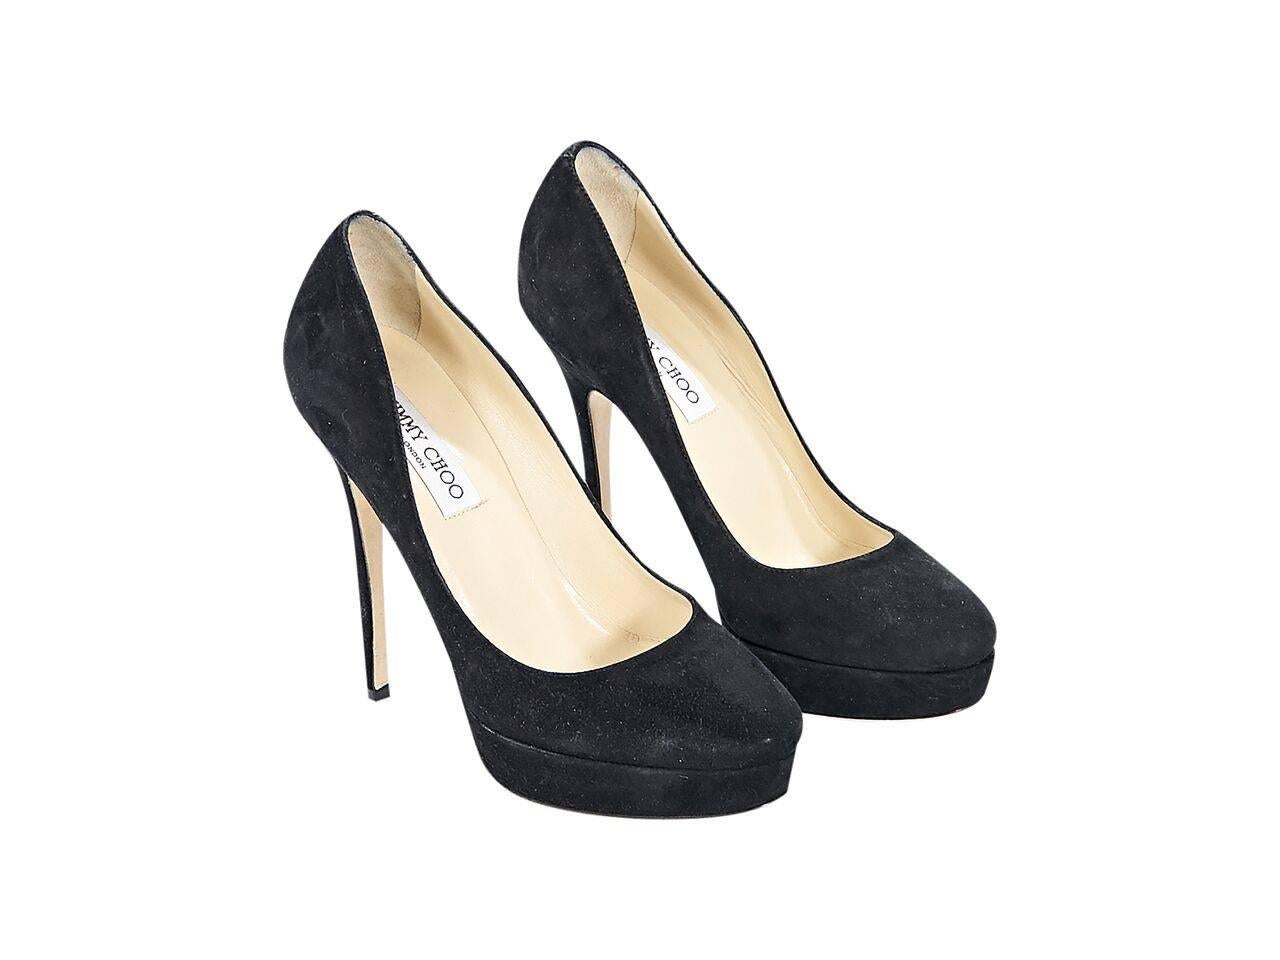 Product details:  Black suede platform pumps by Jimmy Choo.  Towering stiletto and platform design.  Almond toe.  Slip-on style.
Condition: Pre-owned. Very good.
Est. Retail $ 828.00